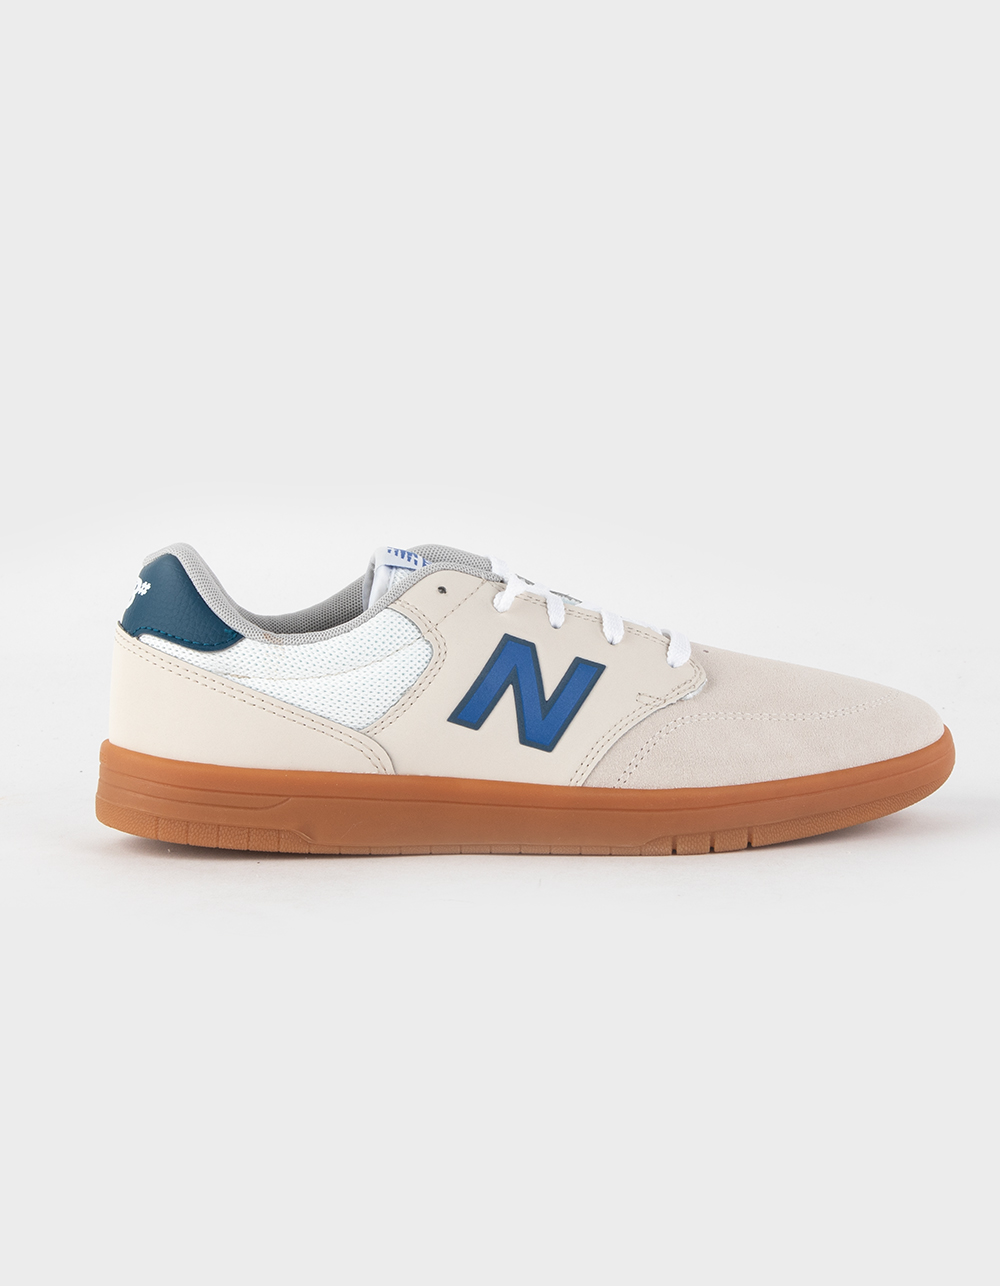 NEW BALANCE 425 Mens Shoes - OFF WHITE | Tillys